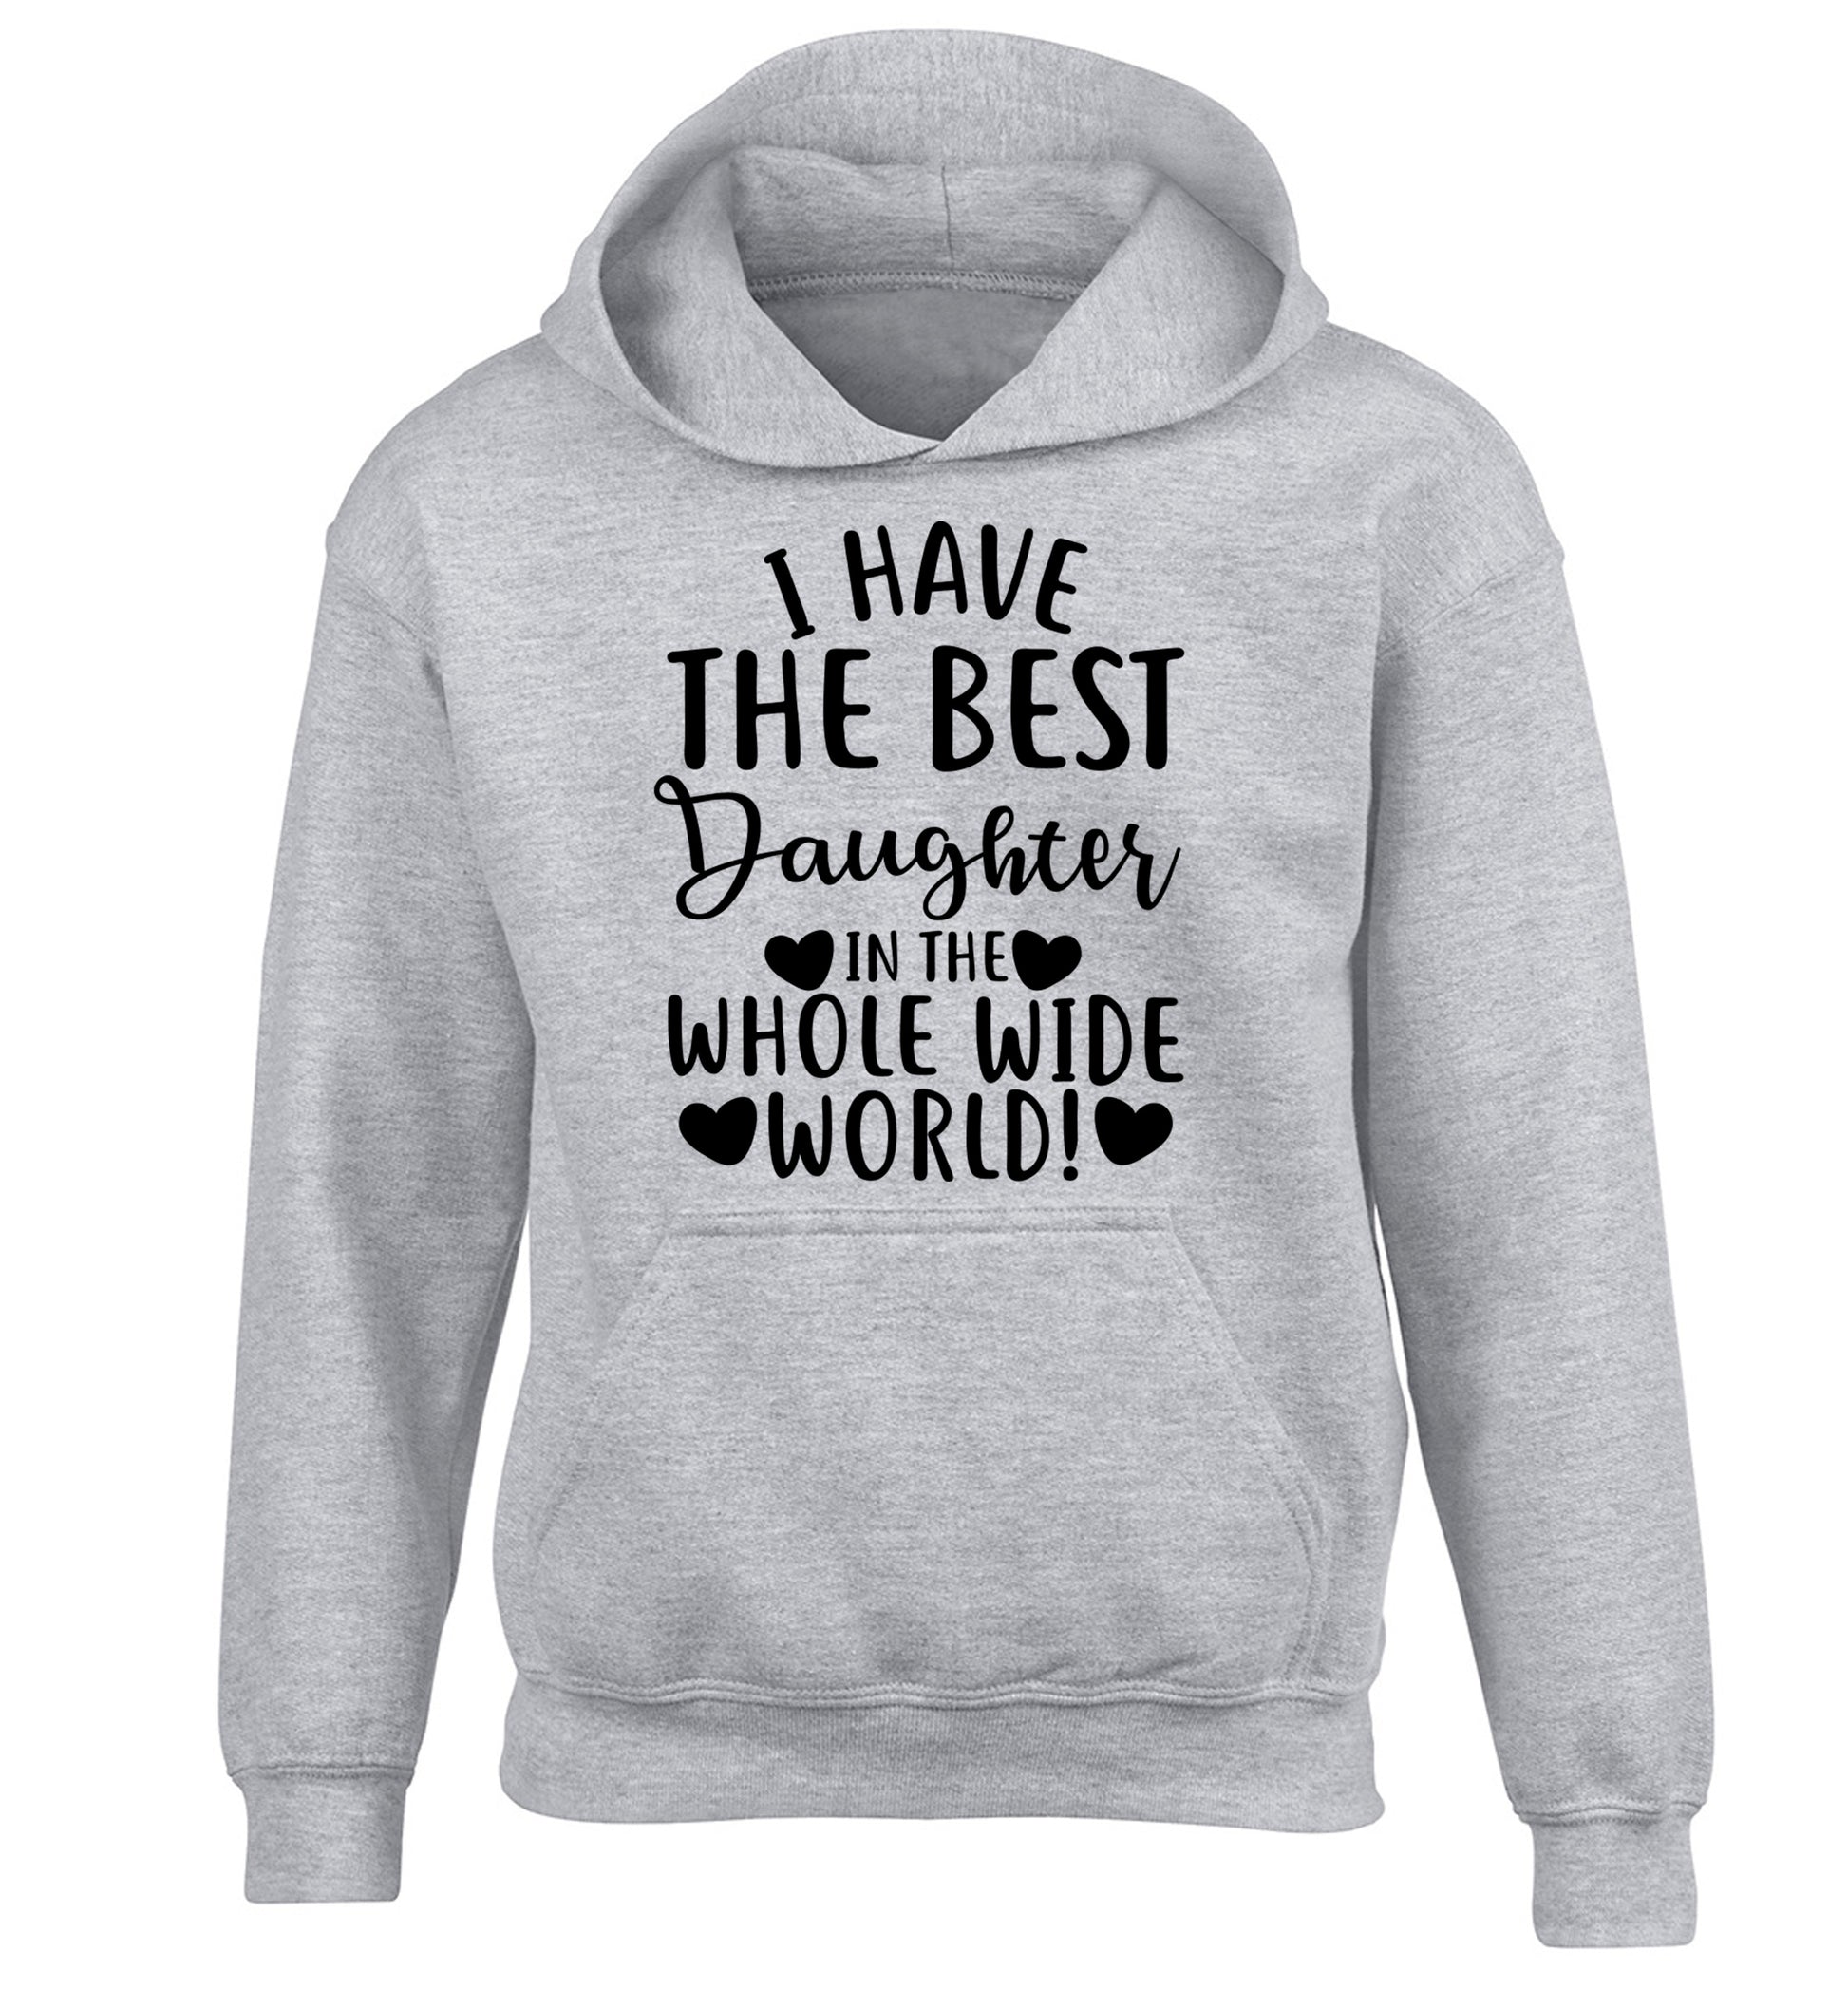 I have the best daughter in the whole wide world! children's grey hoodie 12-13 Years